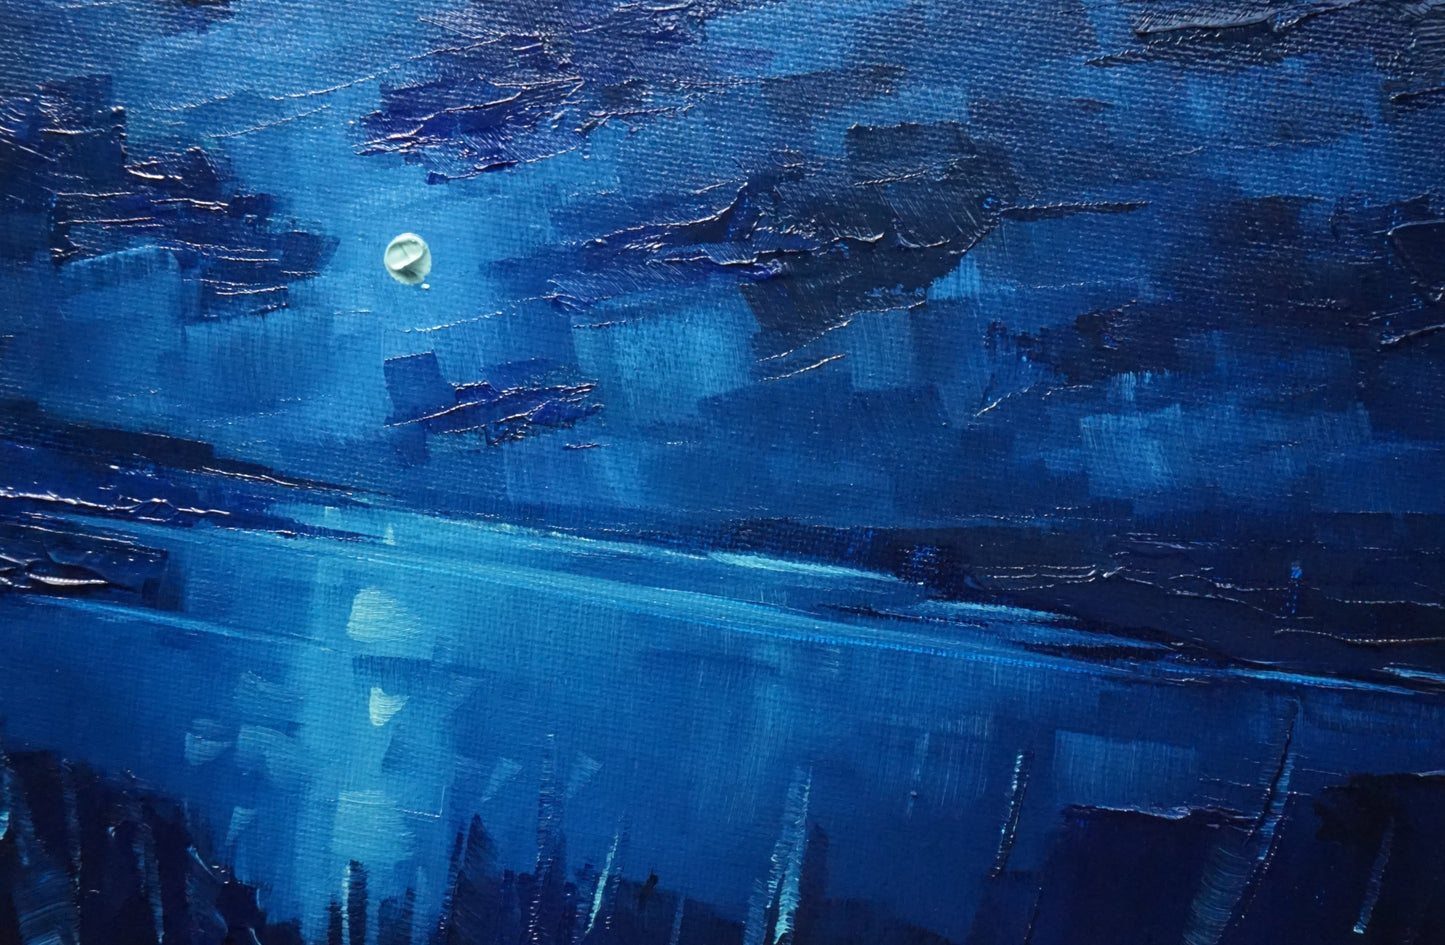 Glow-  23x30.5cm / Oil painting on canvas panel